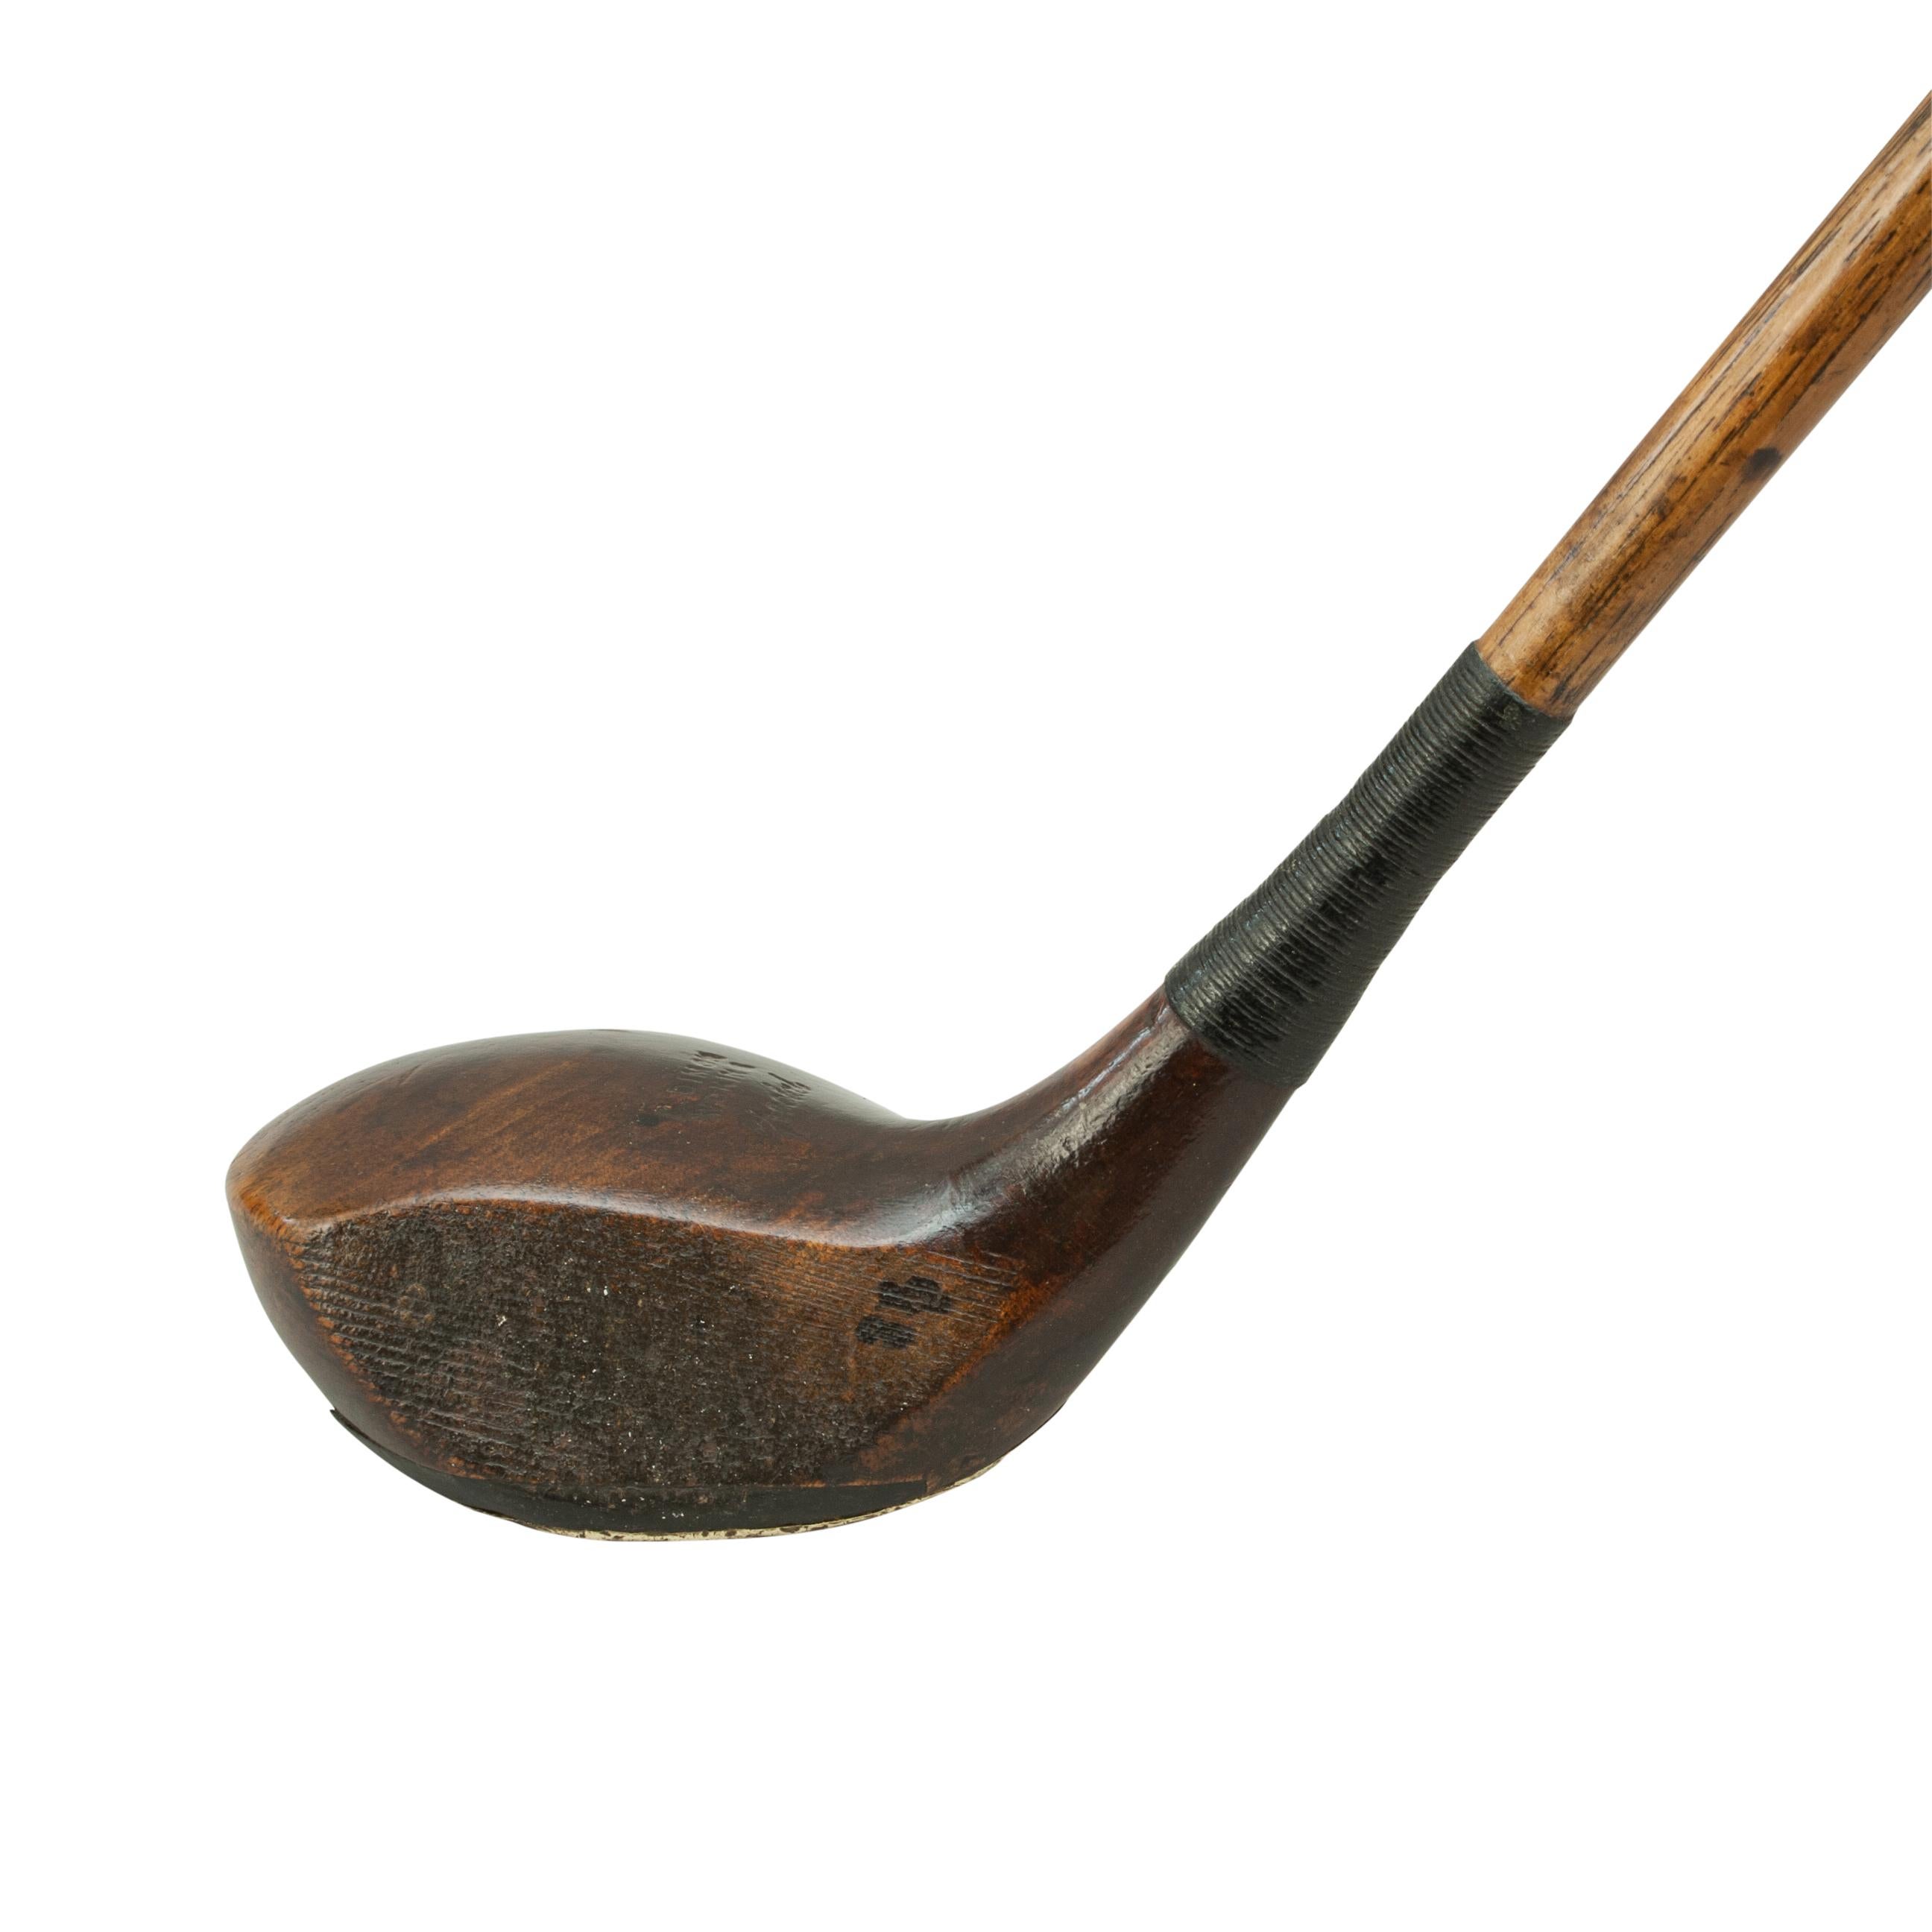 Golf club, hickory spoon, A. Dimon, Woking.
A good persimmon wood Brassie by A. Dimon, Woking. The club has a hickory shaft with a polished leather grip. The head is marked 'A. Dimon, Woking, Special' and has a lead weight to the rear, Horn sole